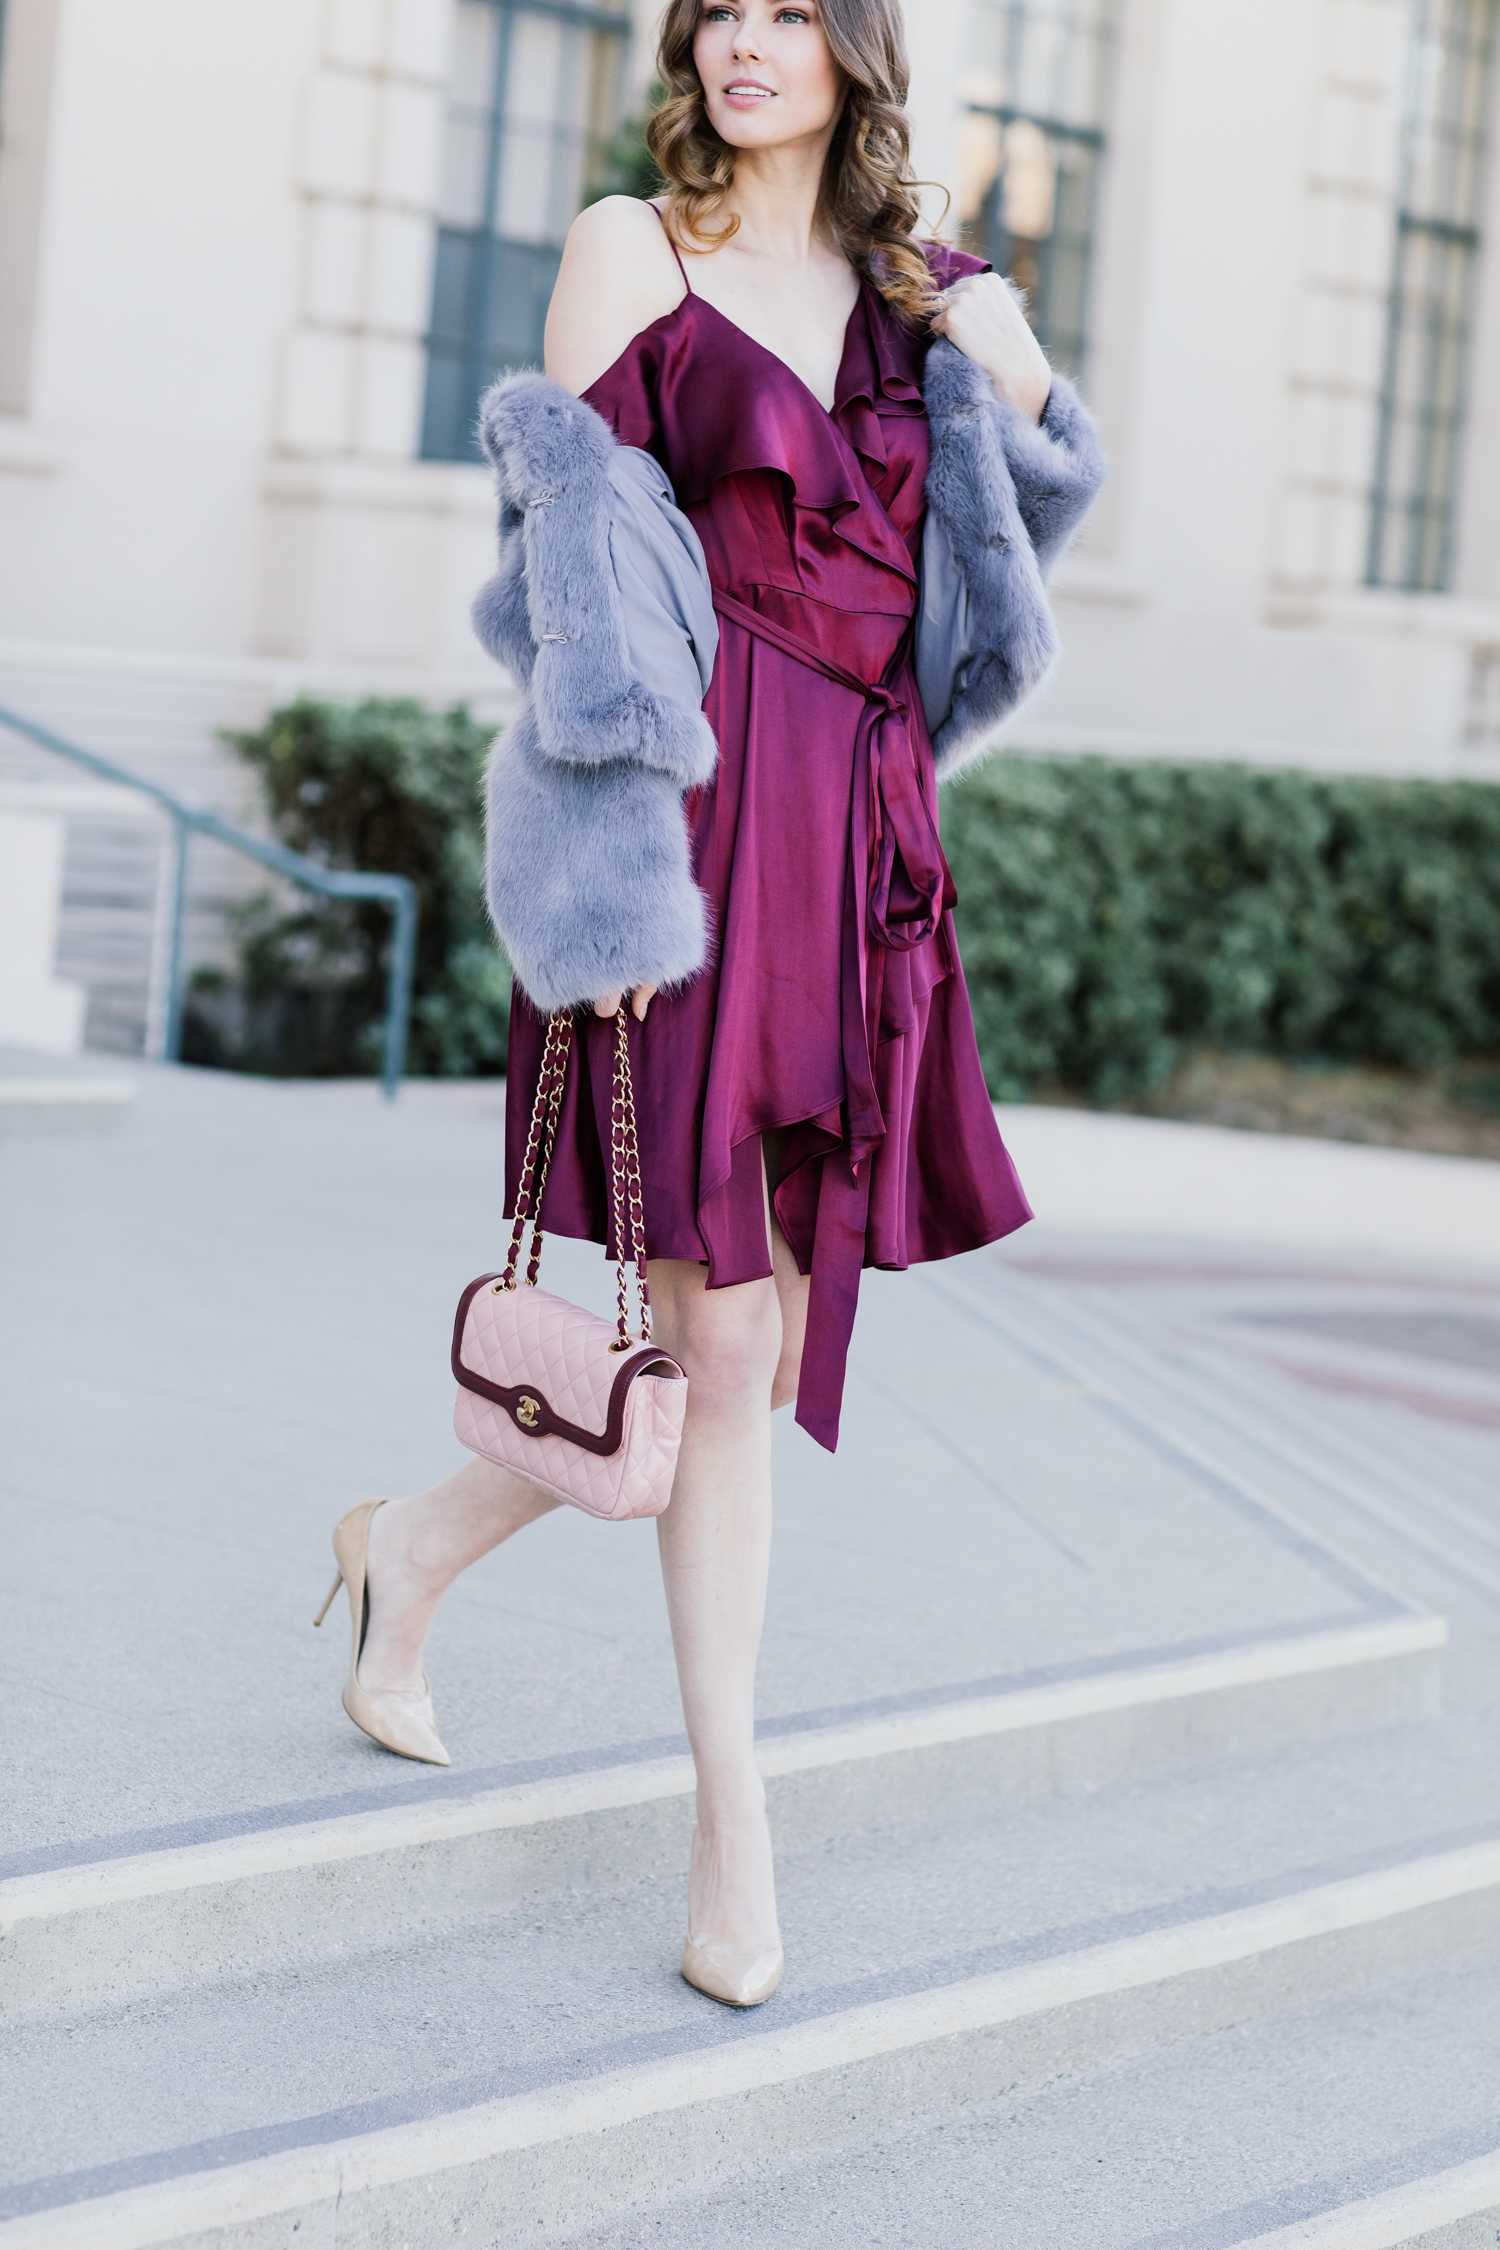 Alyssa Campanella of The A List blog shares her NYE outfit idea wearing Topshop Claire coat and Wayf Rachelle dress